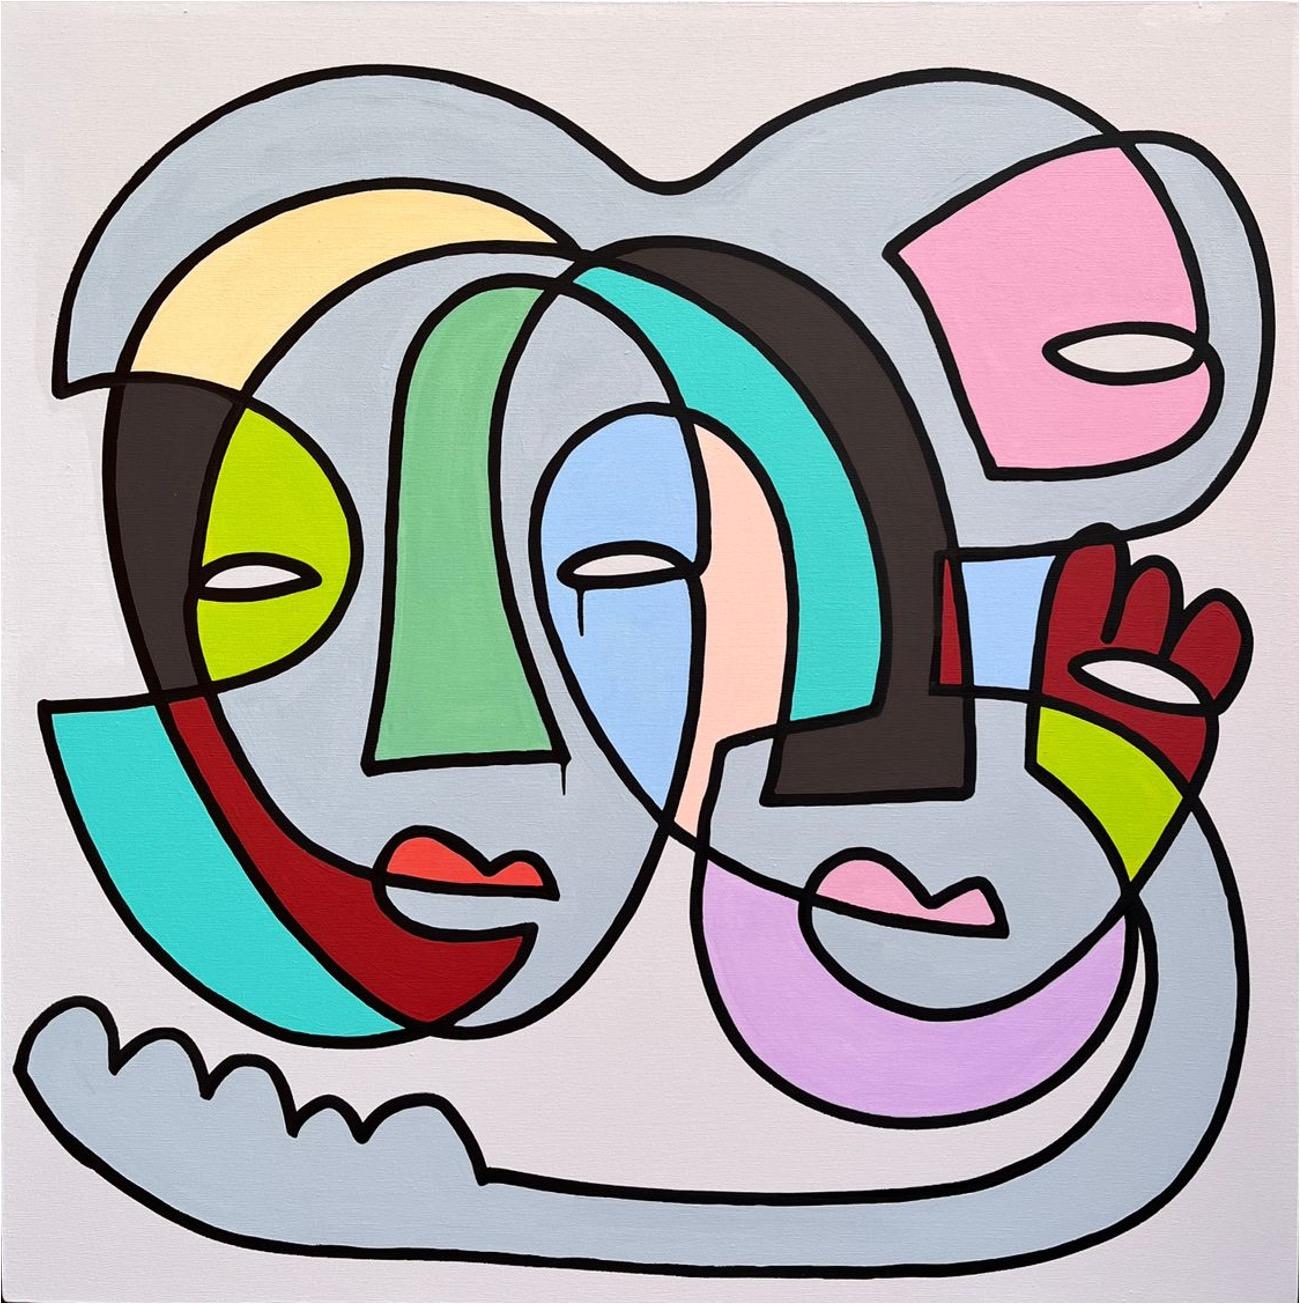 Hold my Hand
Contemporary Art, Abstract Painting
Acrylic on canvas
100x100cm
2024
Signed and dated on the side

About the Artist

Painting was always present in Ana Valdes's life, but it was not until she finished her Bachelor's Degree in Textile